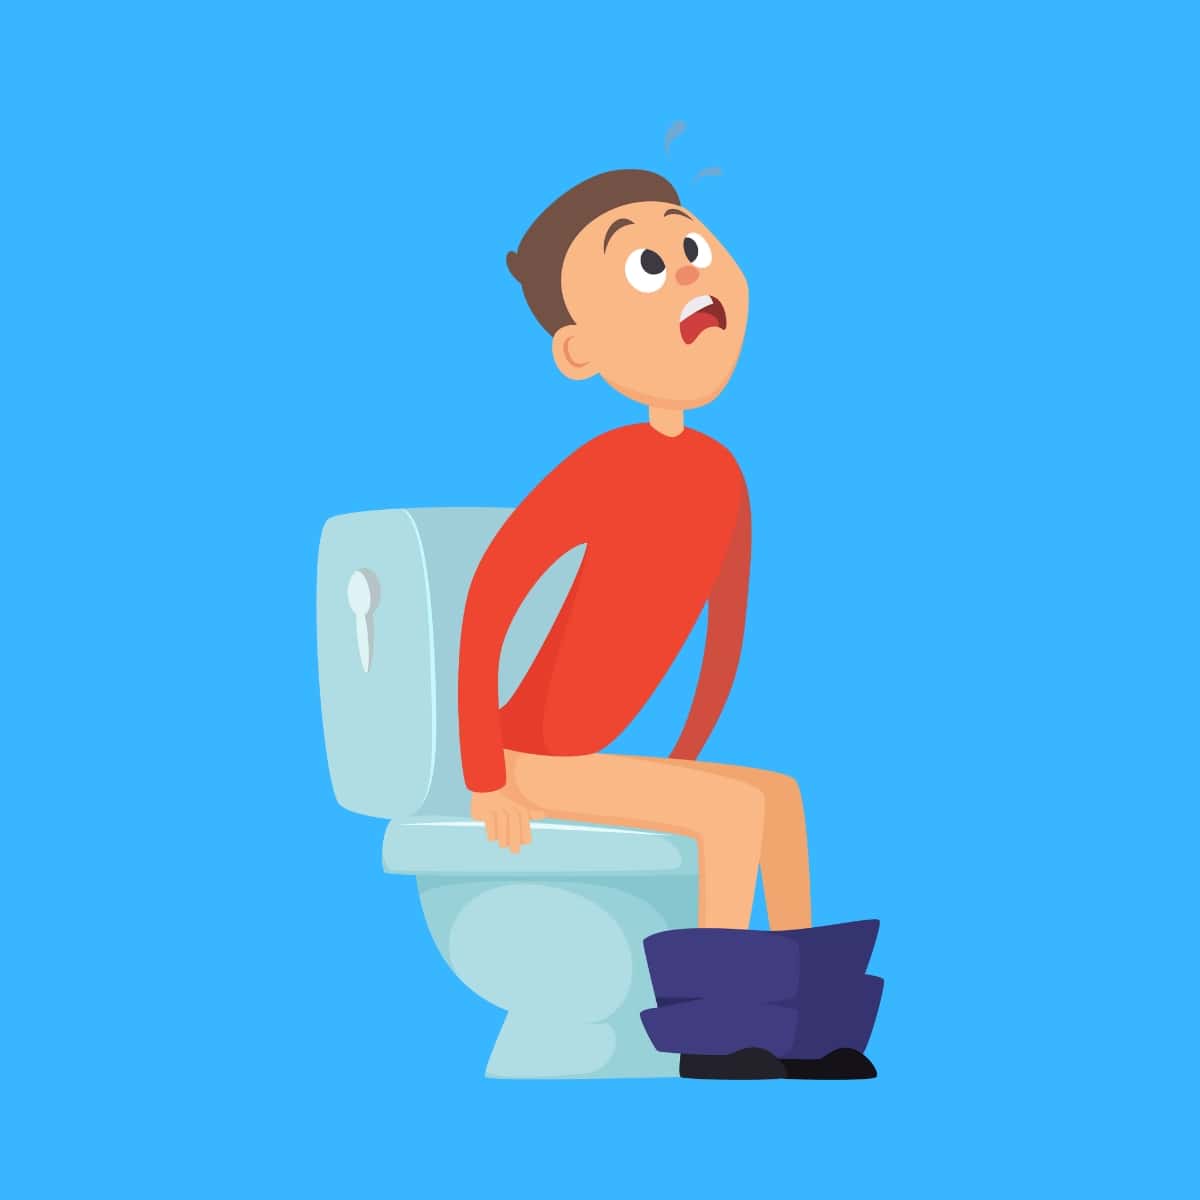 Cartoon graphic of a man ins a red shirt doing diarrhea on a toilet on a blue background.